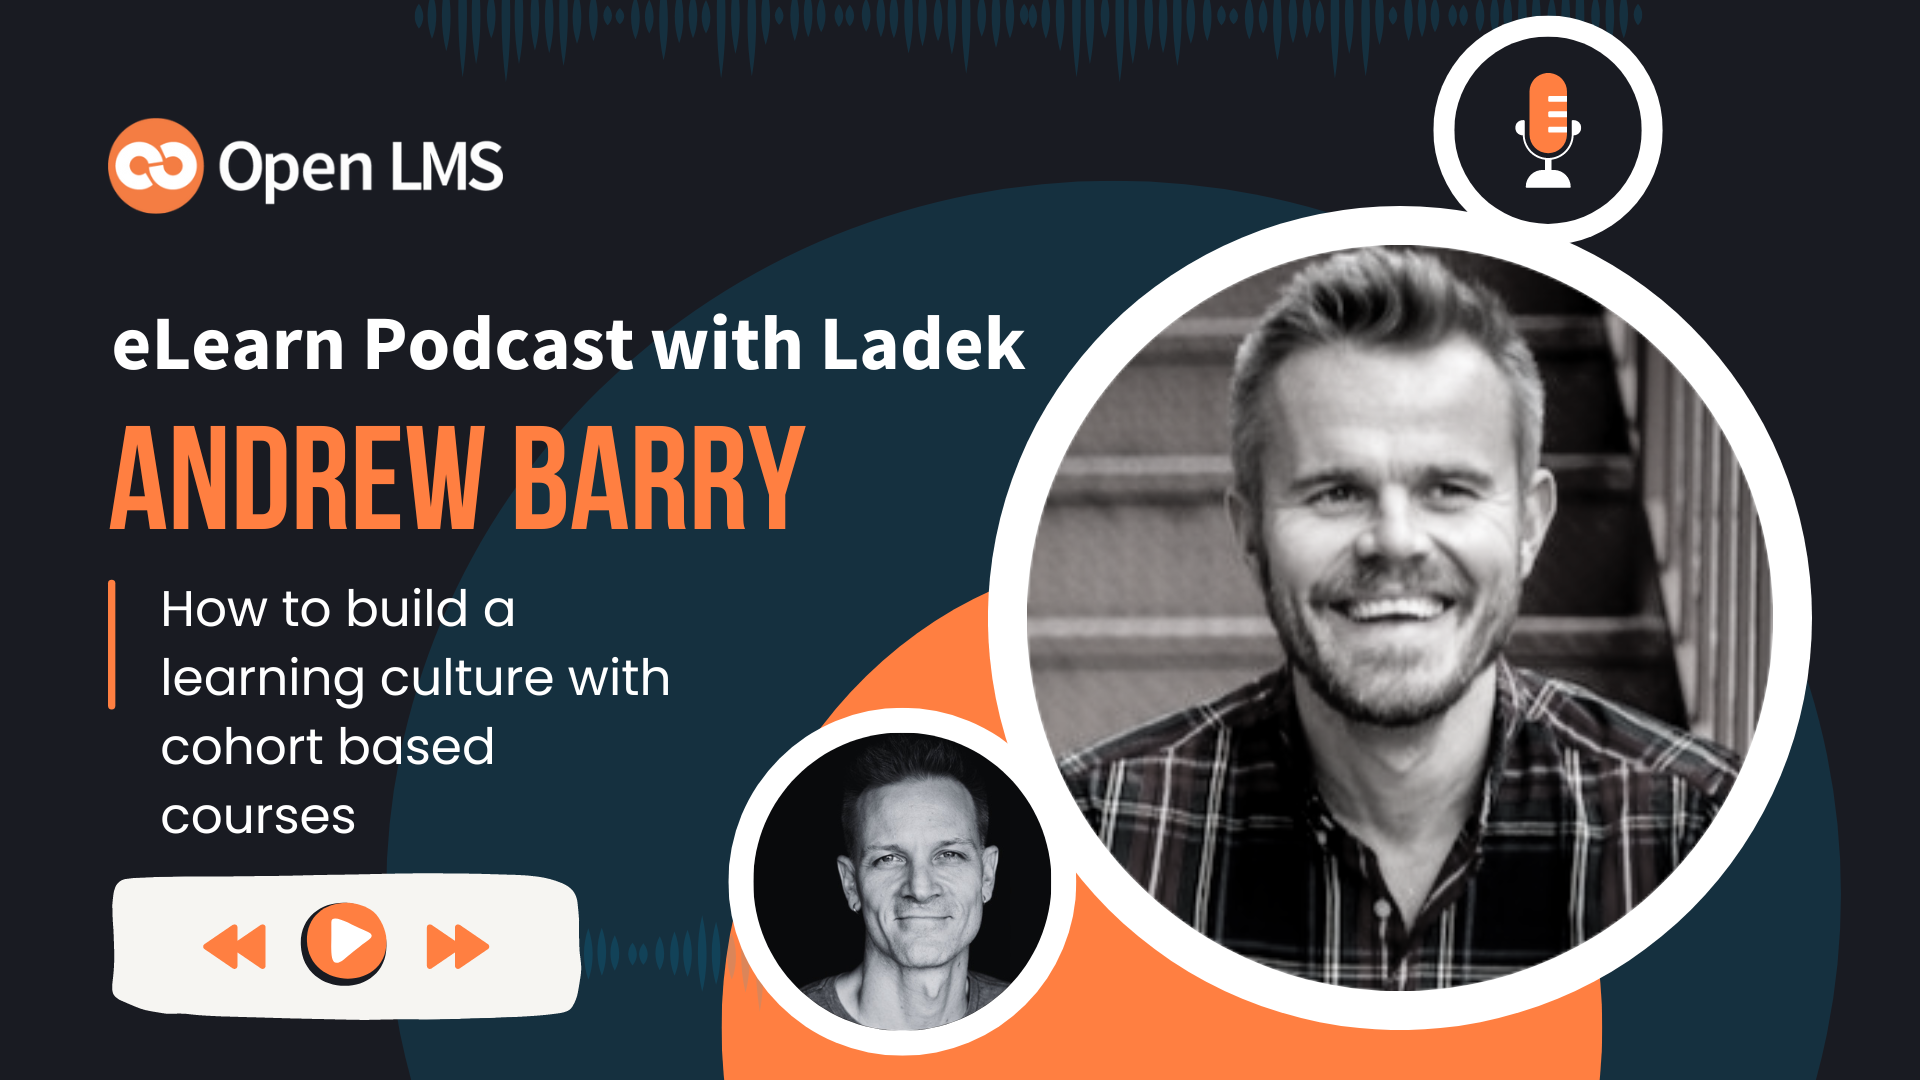 How to build a learning culture with cohort based courses with Andrew Barry